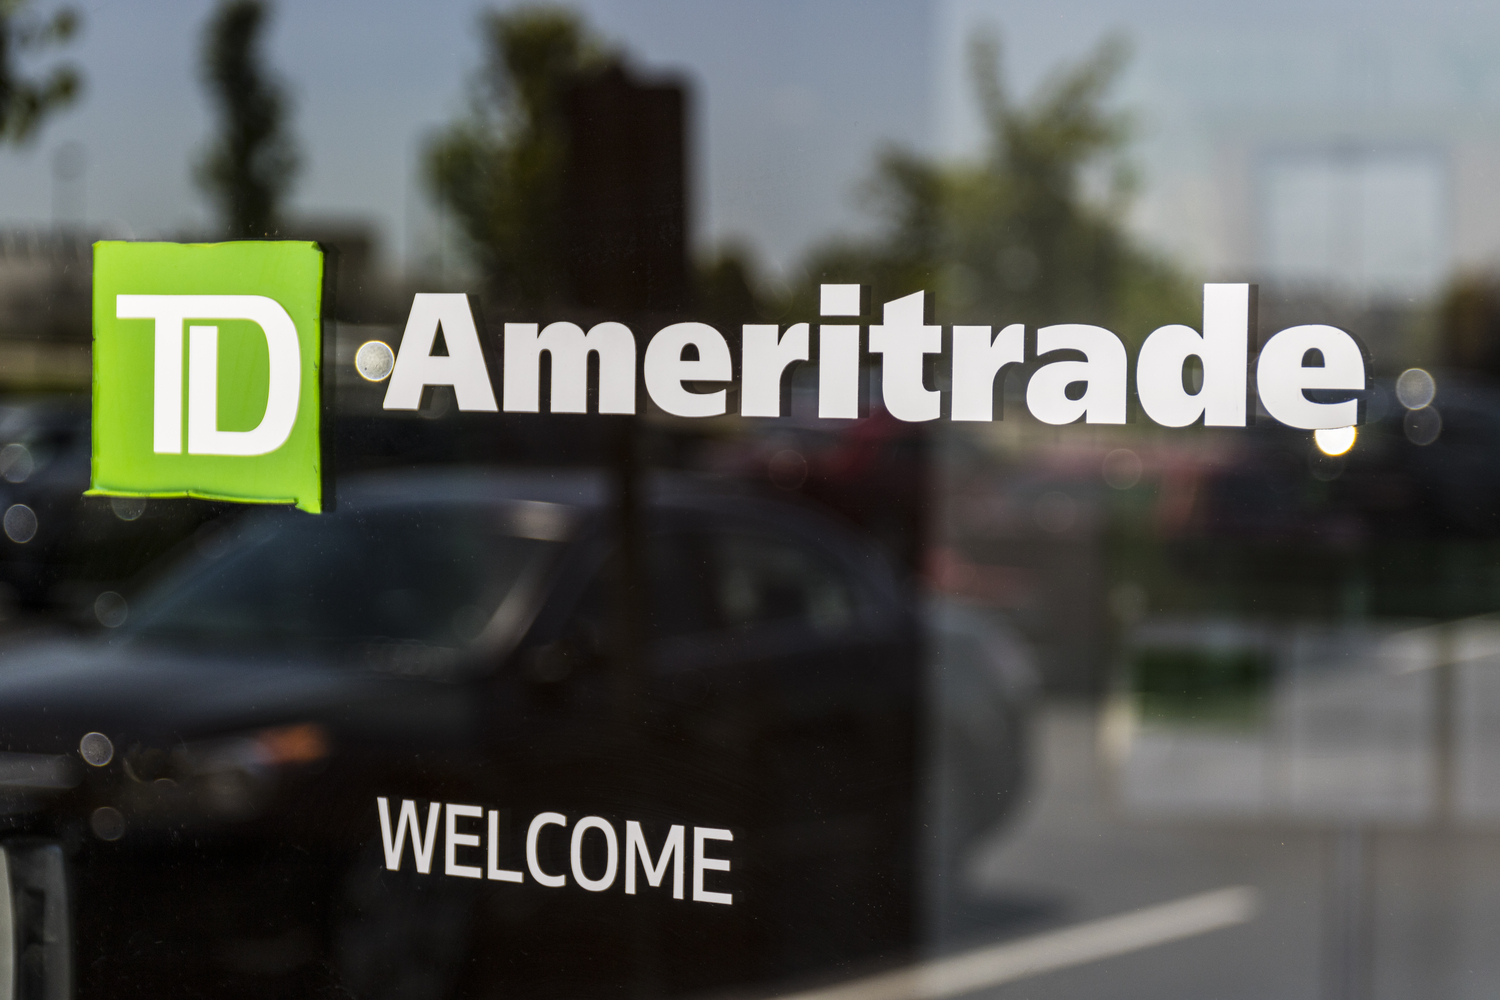 TD Ameritrade-Backed ErisX Gets Green Light To Settle Futures In Bitcoin